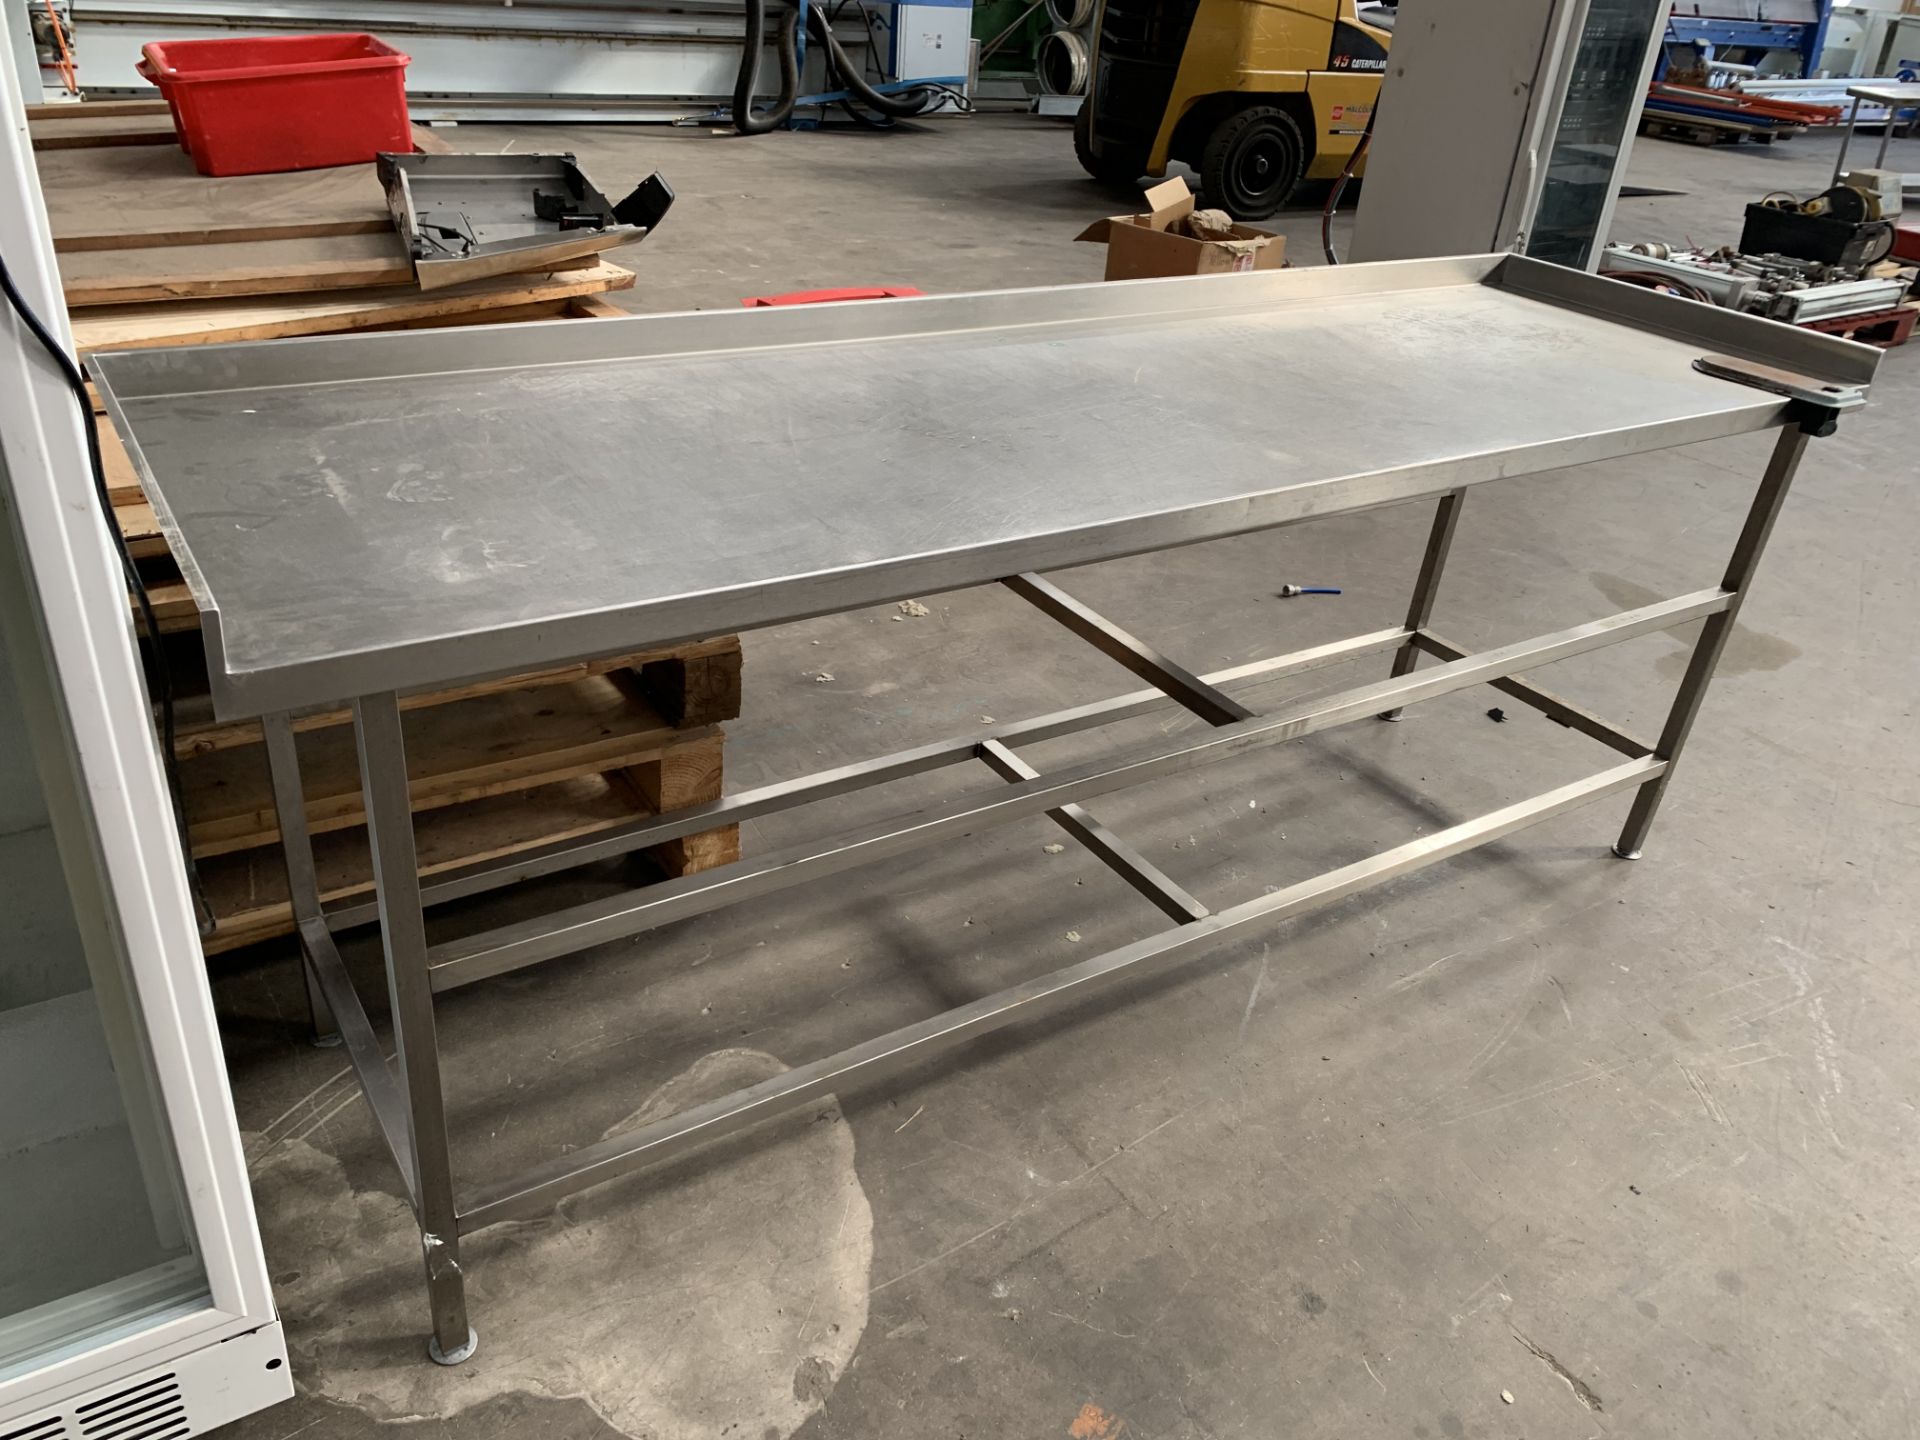 Large Stainless Steel Prep Table with Splashback and Sides - Image 2 of 2